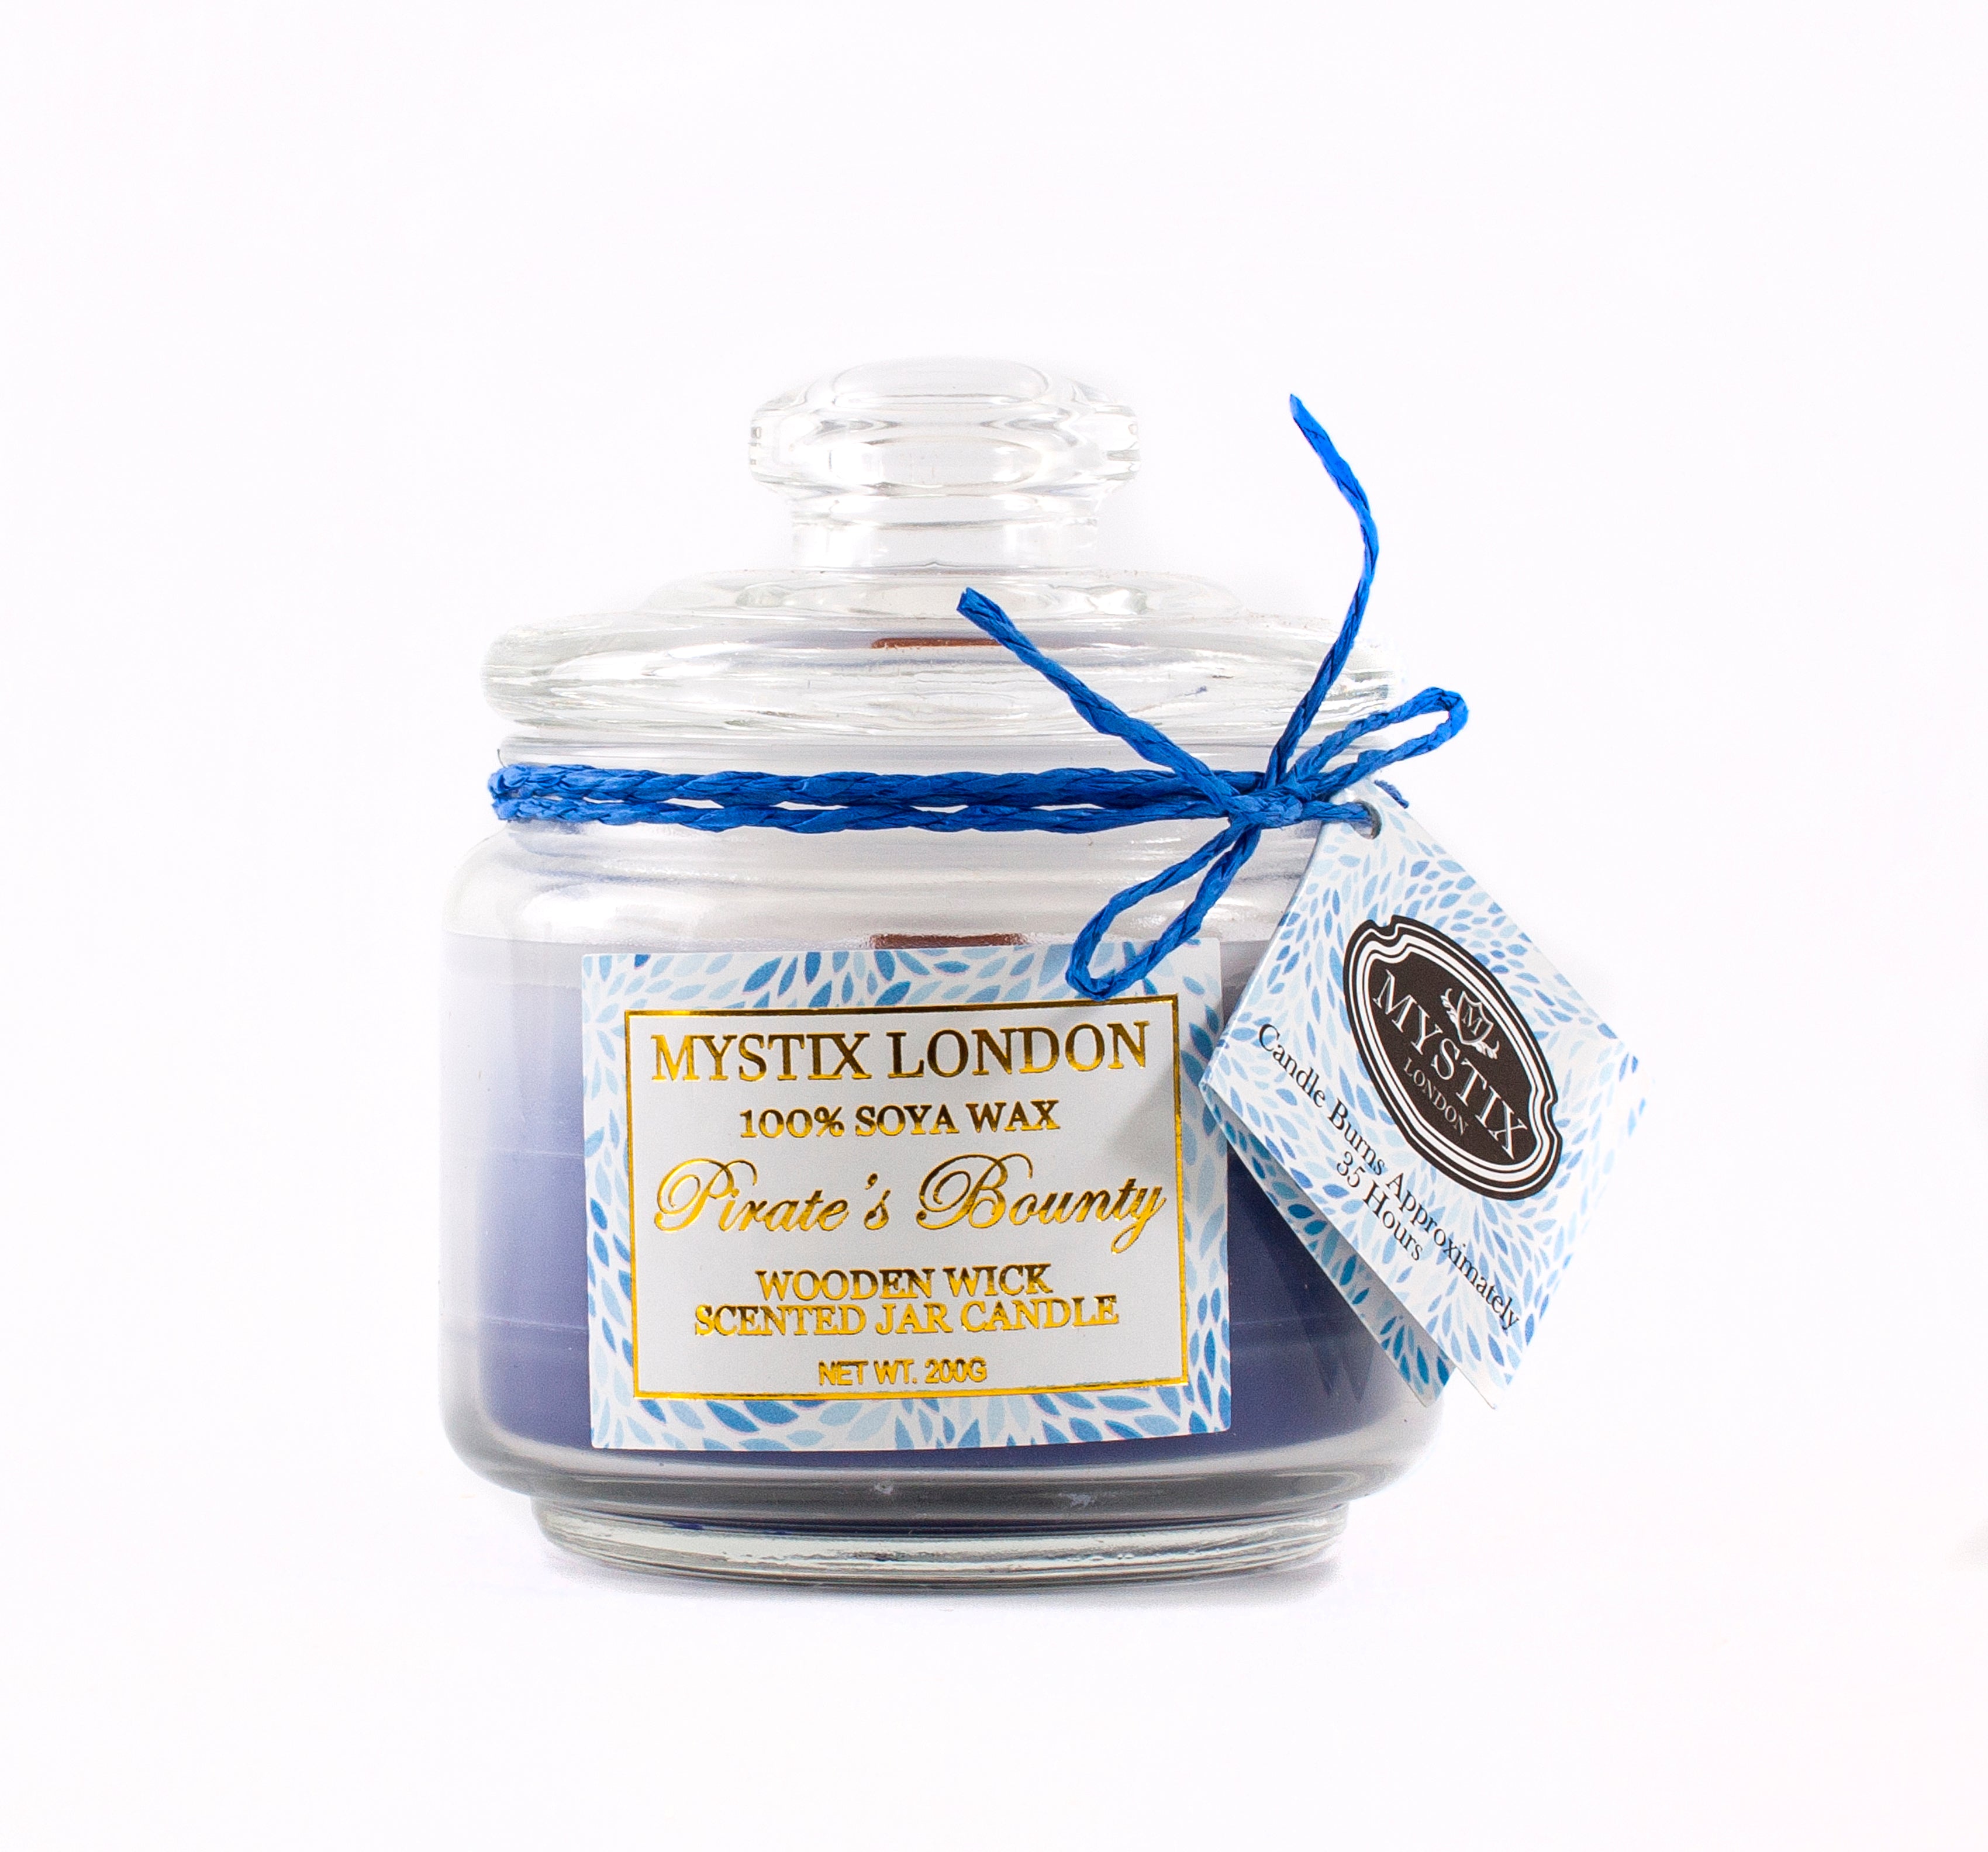 Pirate’s Bounty Scented Jar Candle